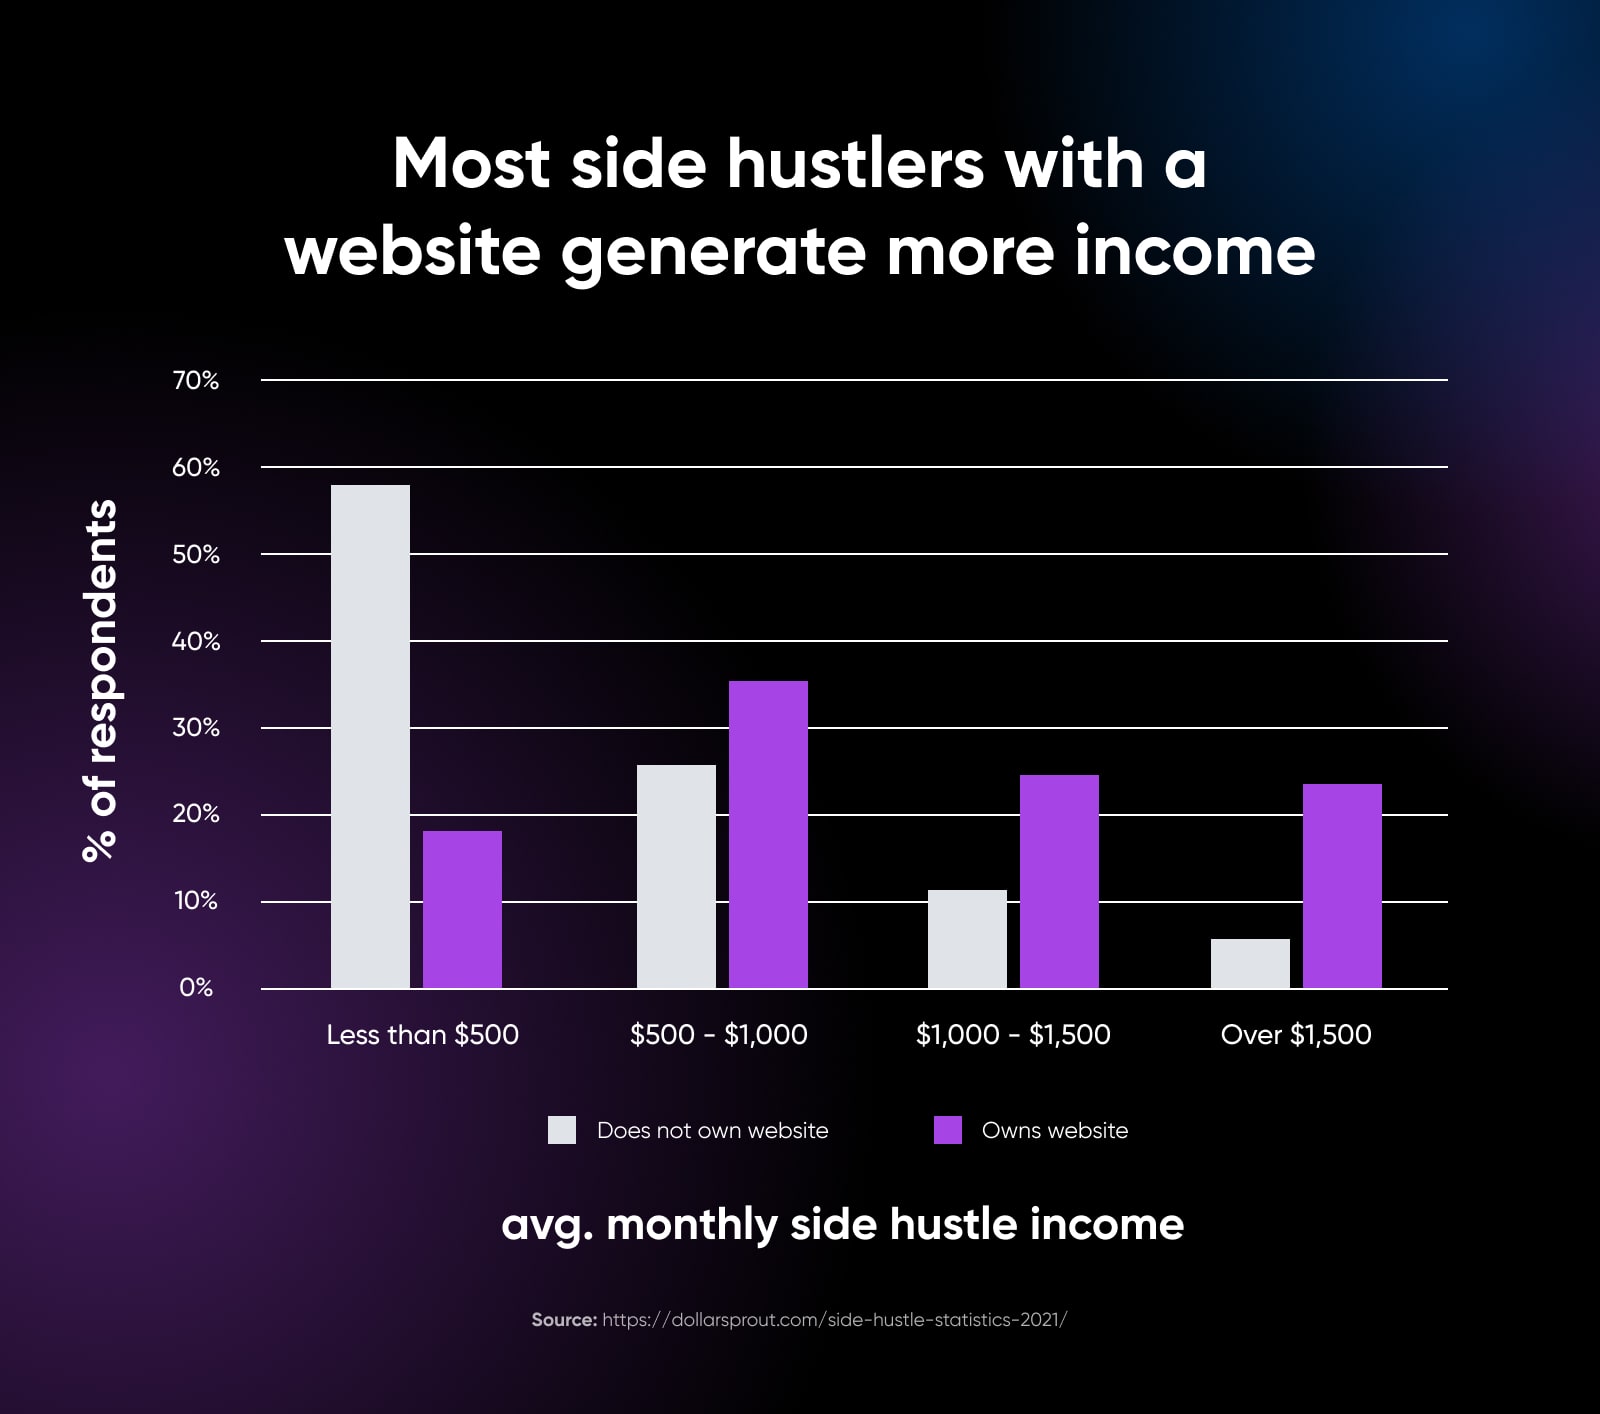 bar graph showing the average monthly side hustle income between those that own a betside and those that do not, higher incomes ($500+) are from people who own a website